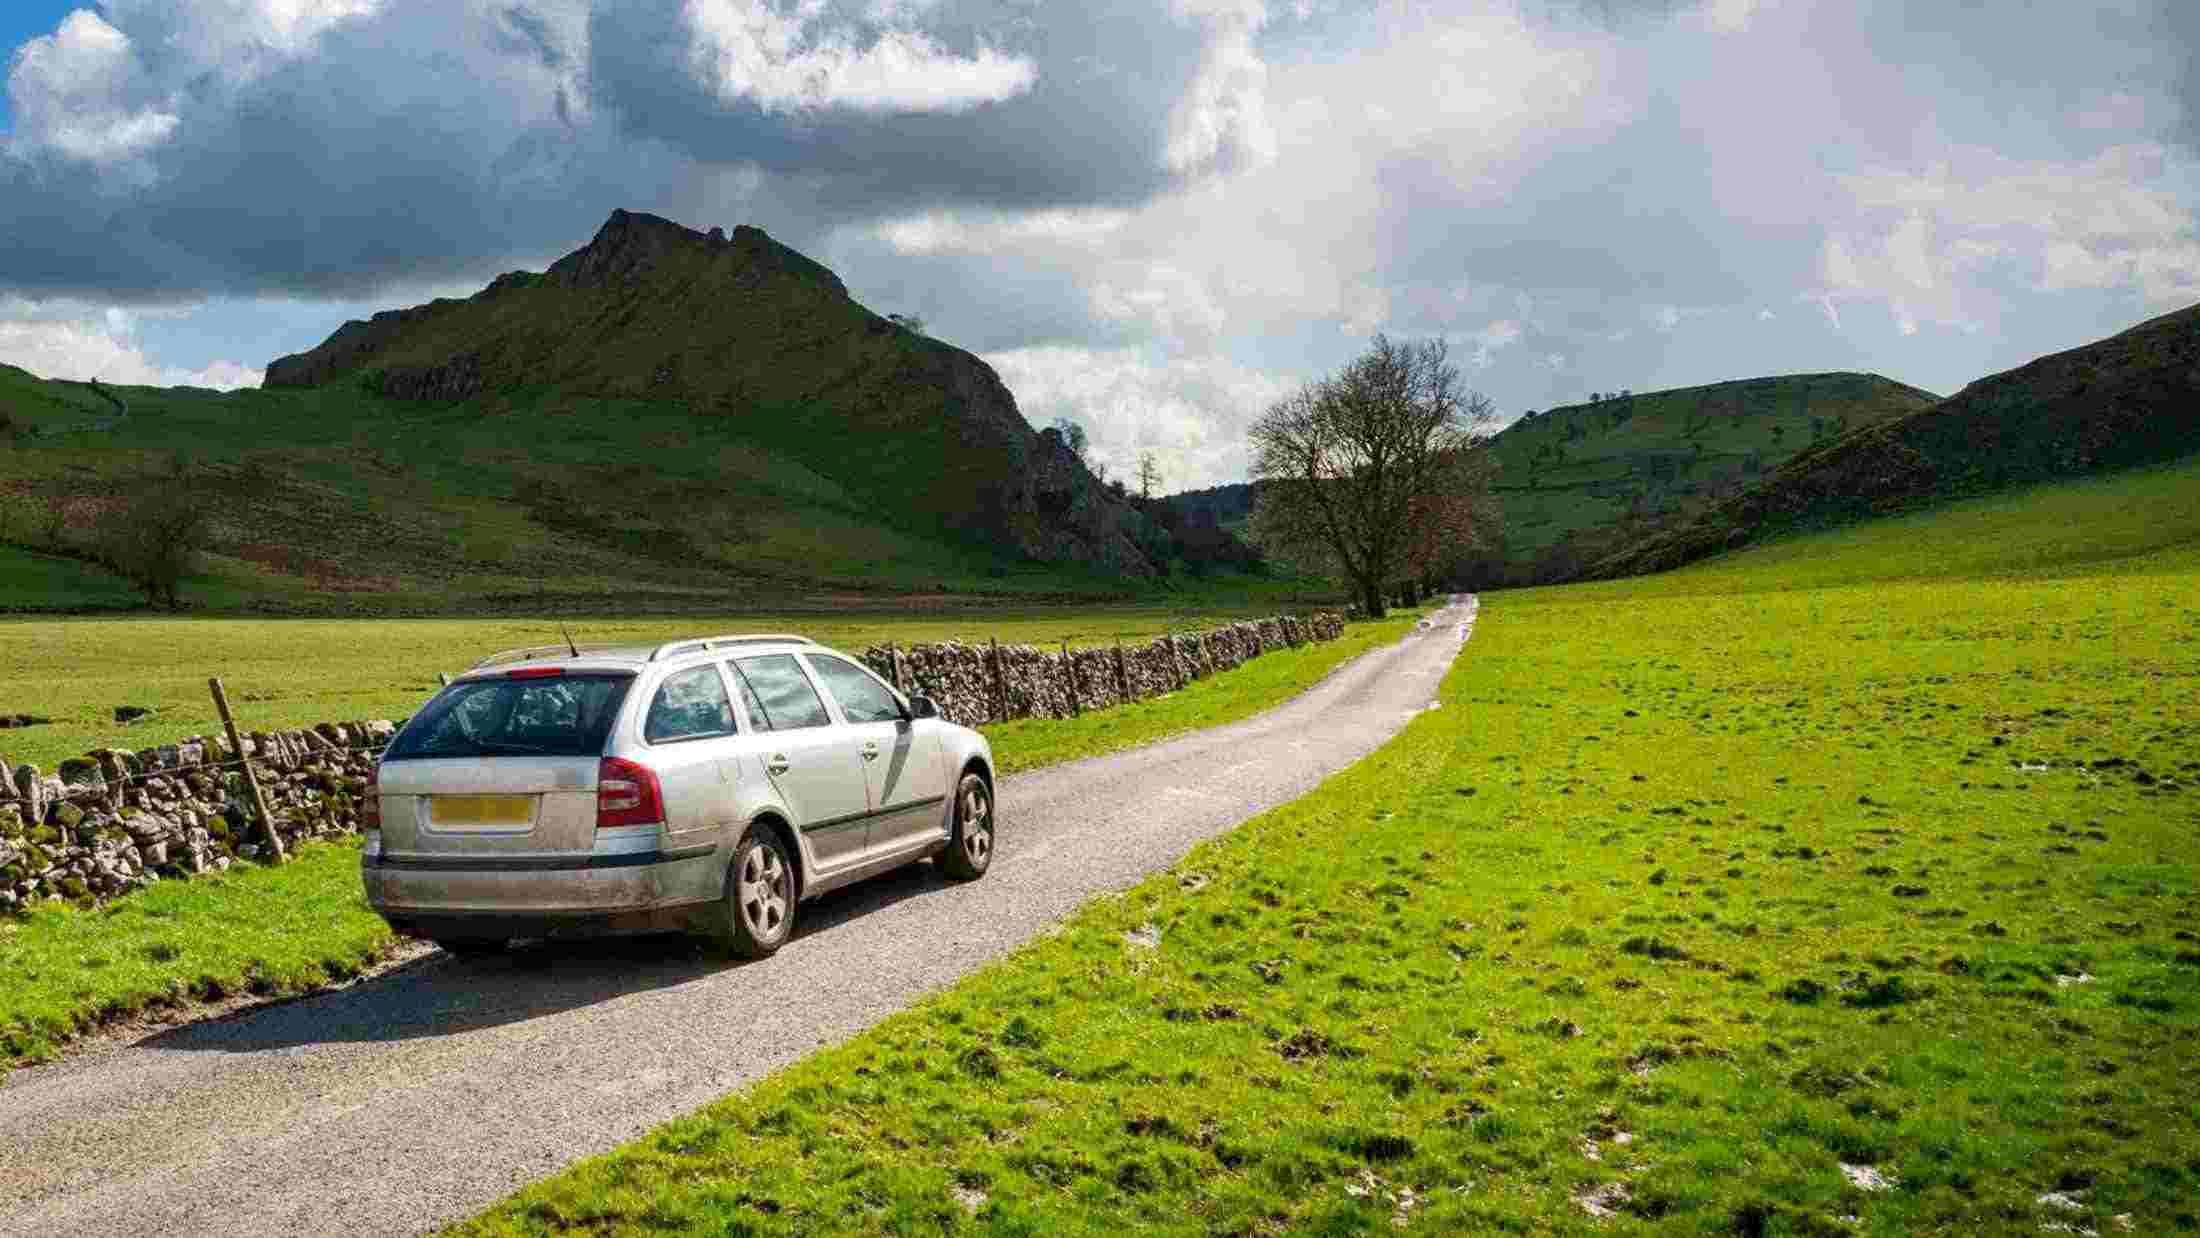 https://www.axa.co.uk/globalassets/new-website/car/tips-and-guides/silver-estate-car-on-a-rural-road-in-the-peak-district-england.jpg?width=&quality=80